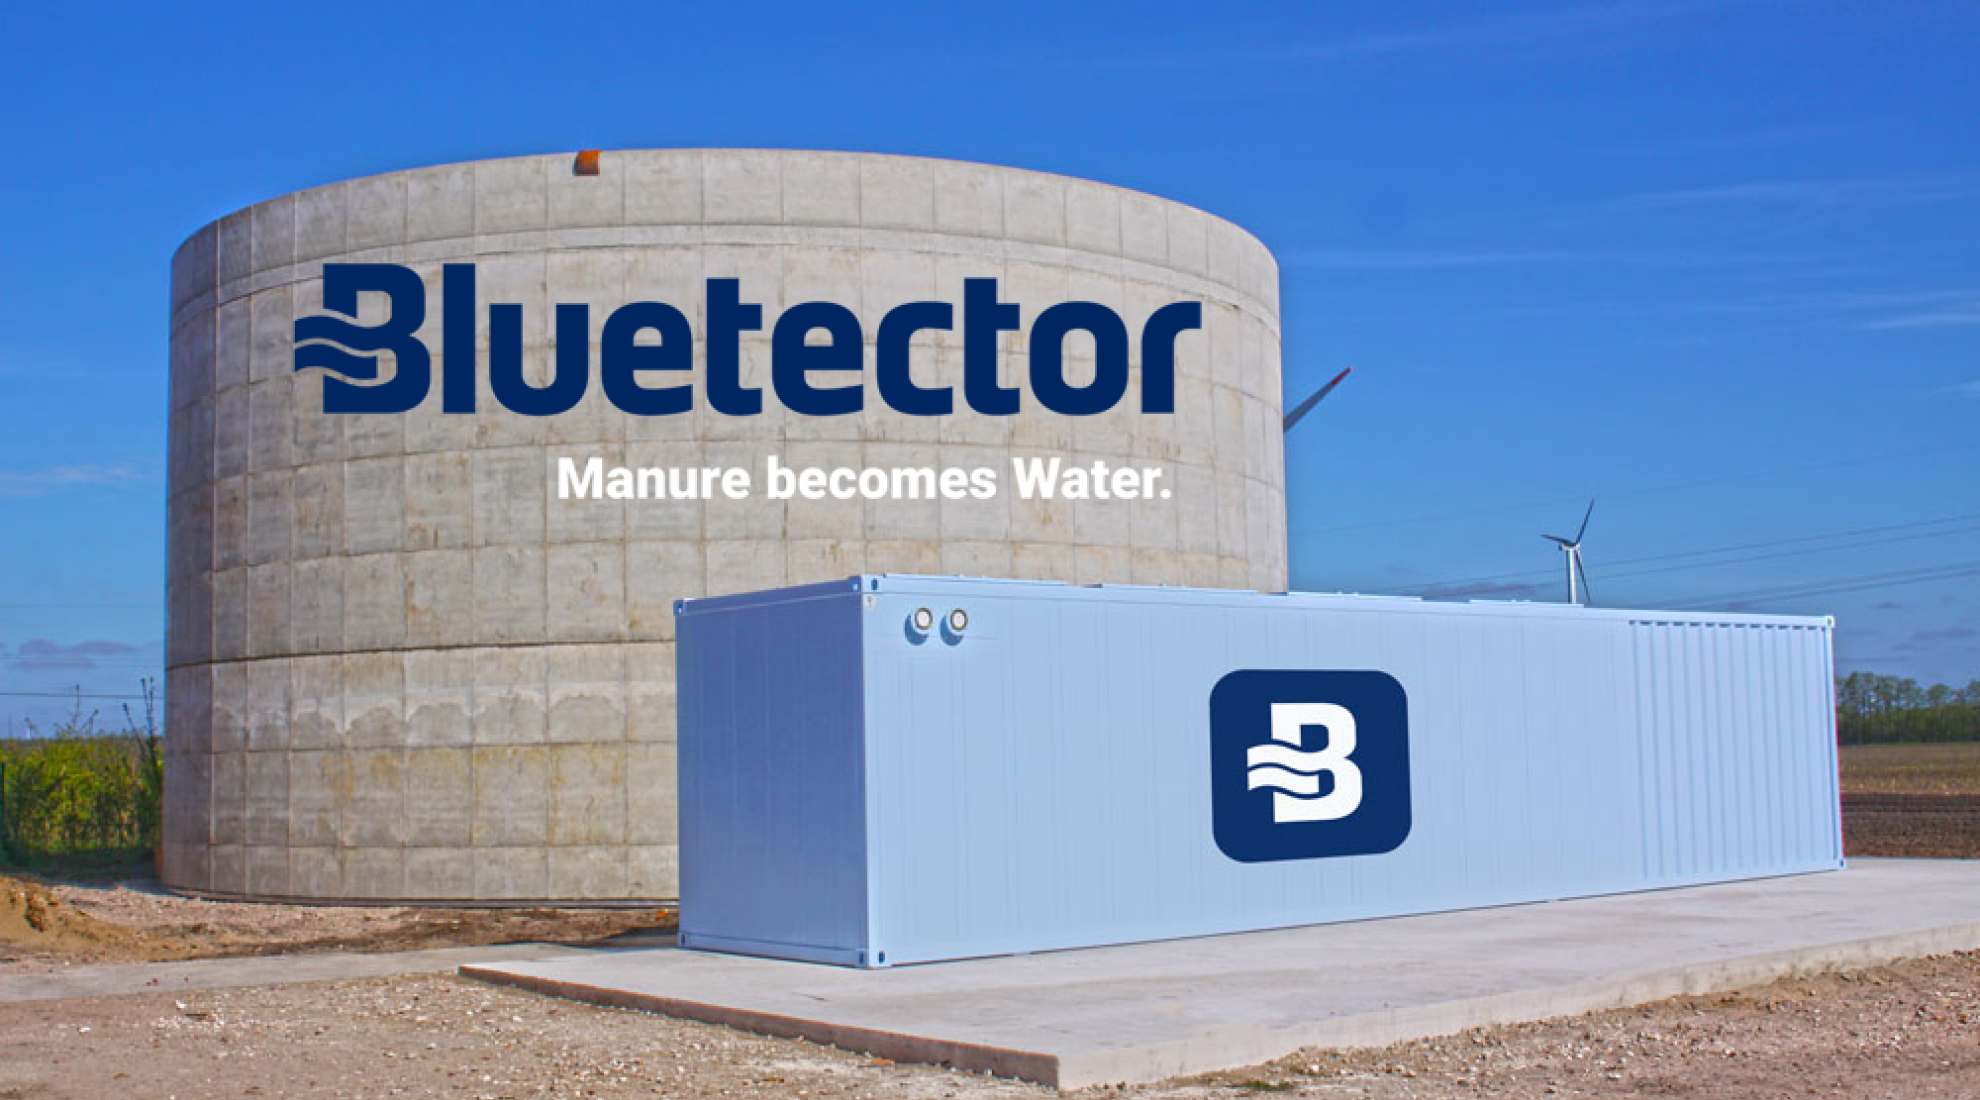 Bluetector – Manure becomes Water